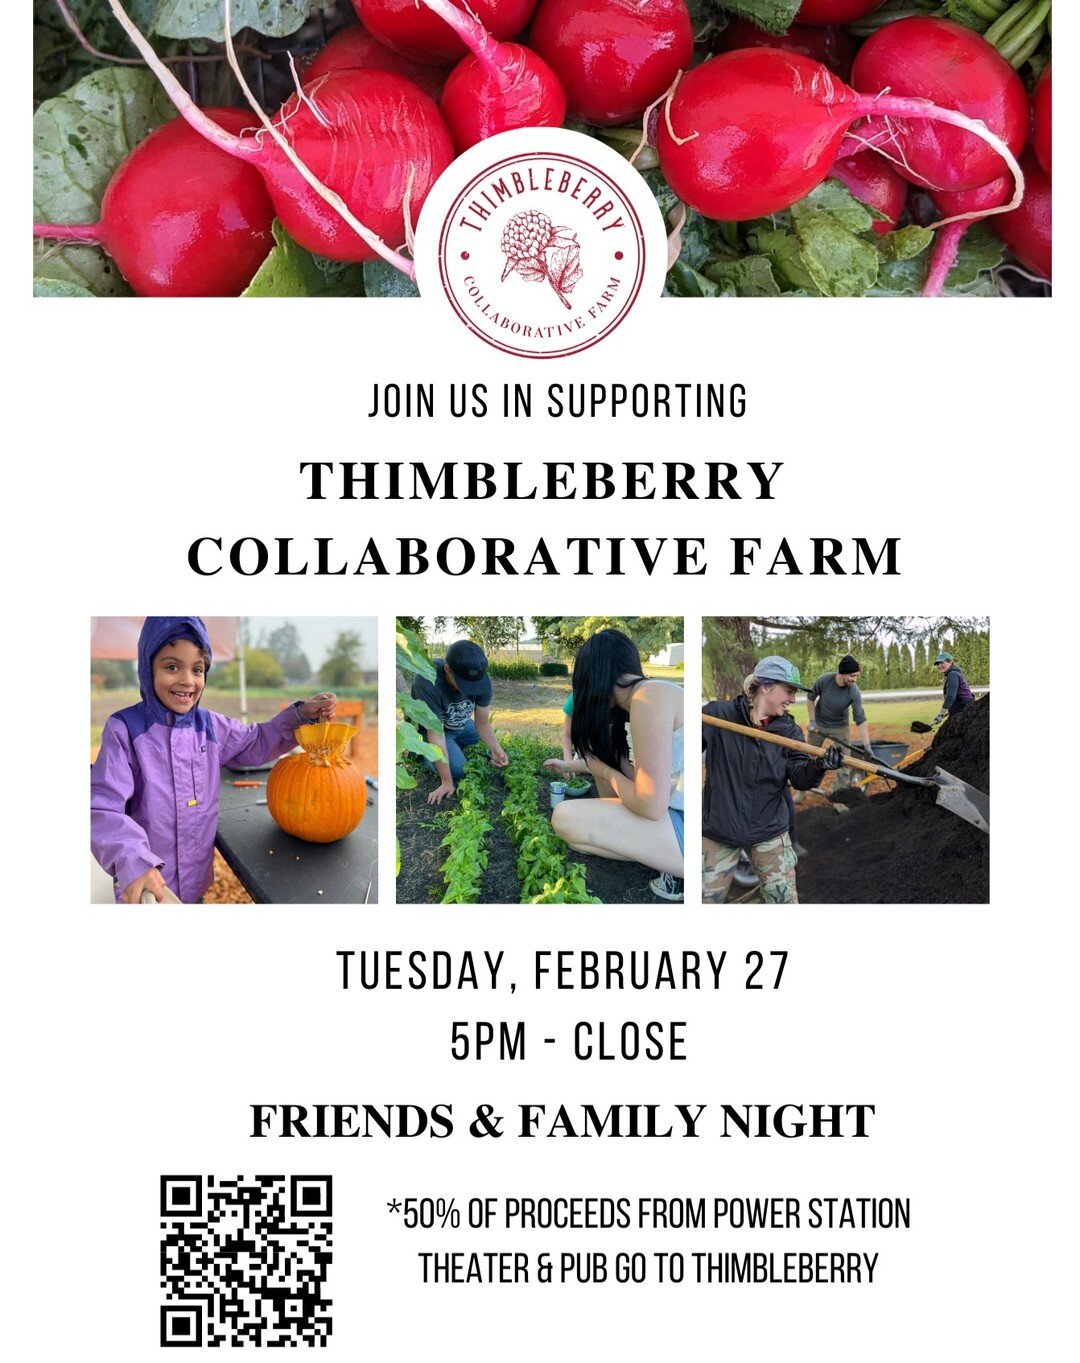 📣Calling all Tot lovers📣

Join us on February 27th for a Friends &amp; Family Night benefiting Thimbleberry Collaborative Farm! From 5pm to close the Power Station Theater &amp; Pub at Edgefield will be donating 50% of proceeds to Thimbleberry. 

B